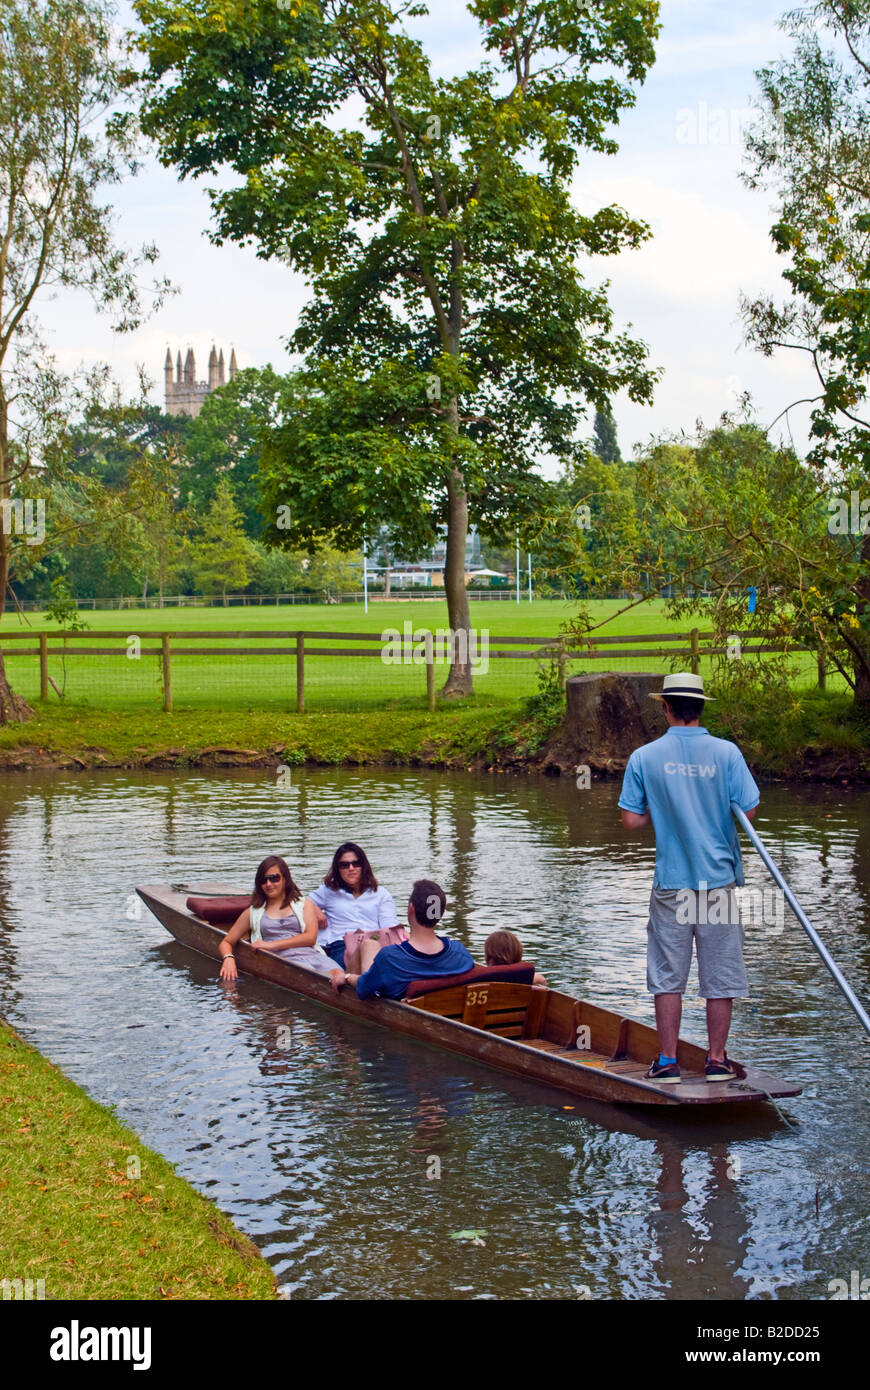 Punting on the River Cherwell, Oxford, England Stock Photo